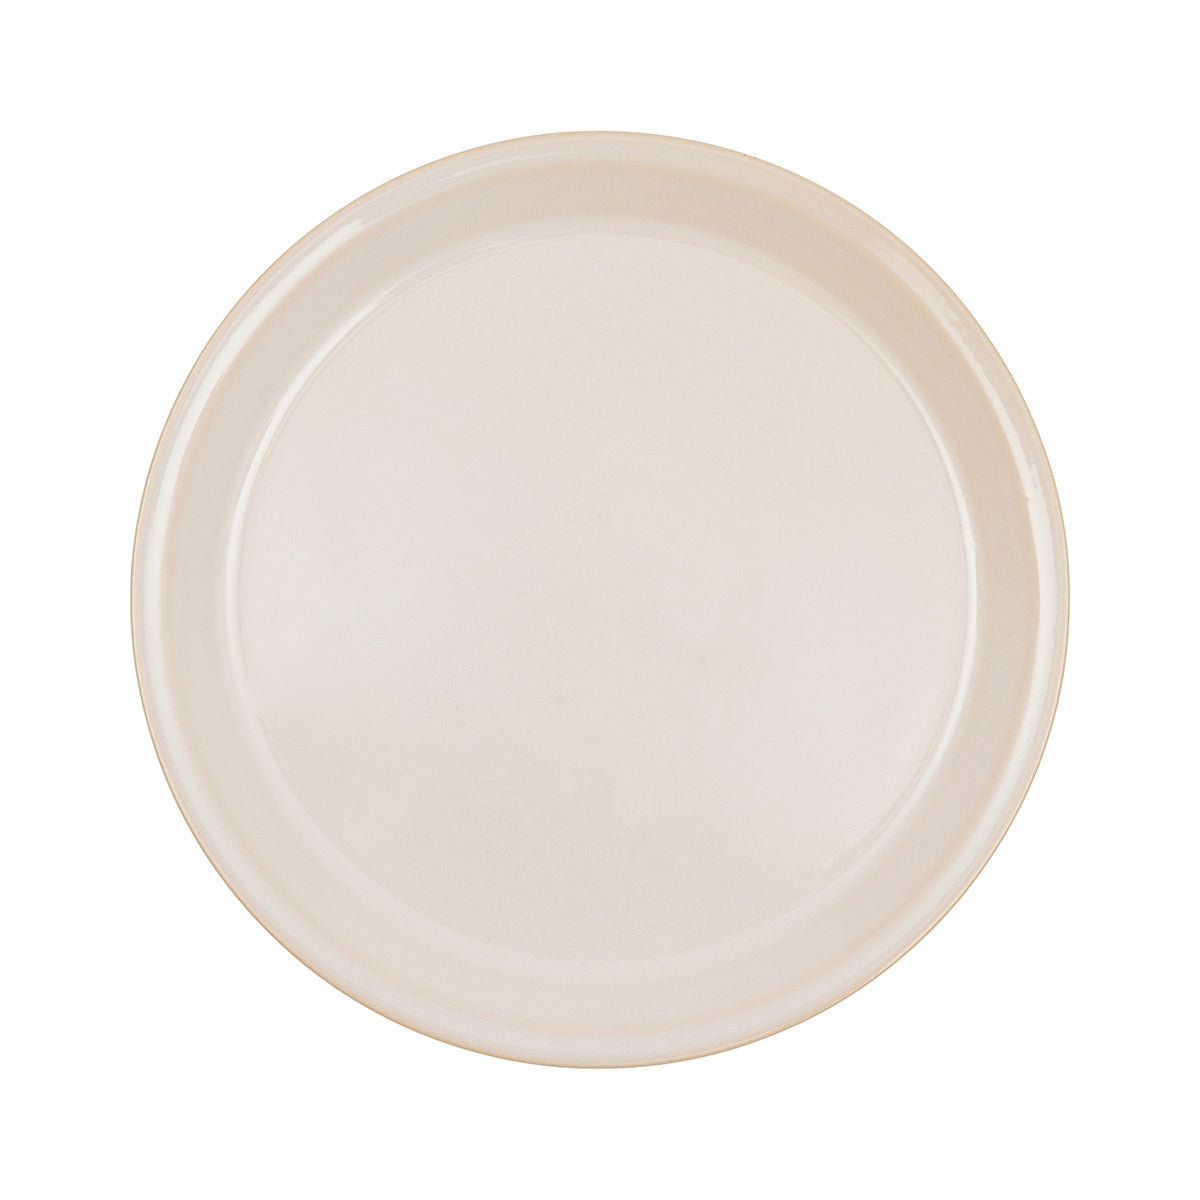 OYOY LIVING Yuka Lunch Plate - Pack of 2 Plate 102 Offwhite